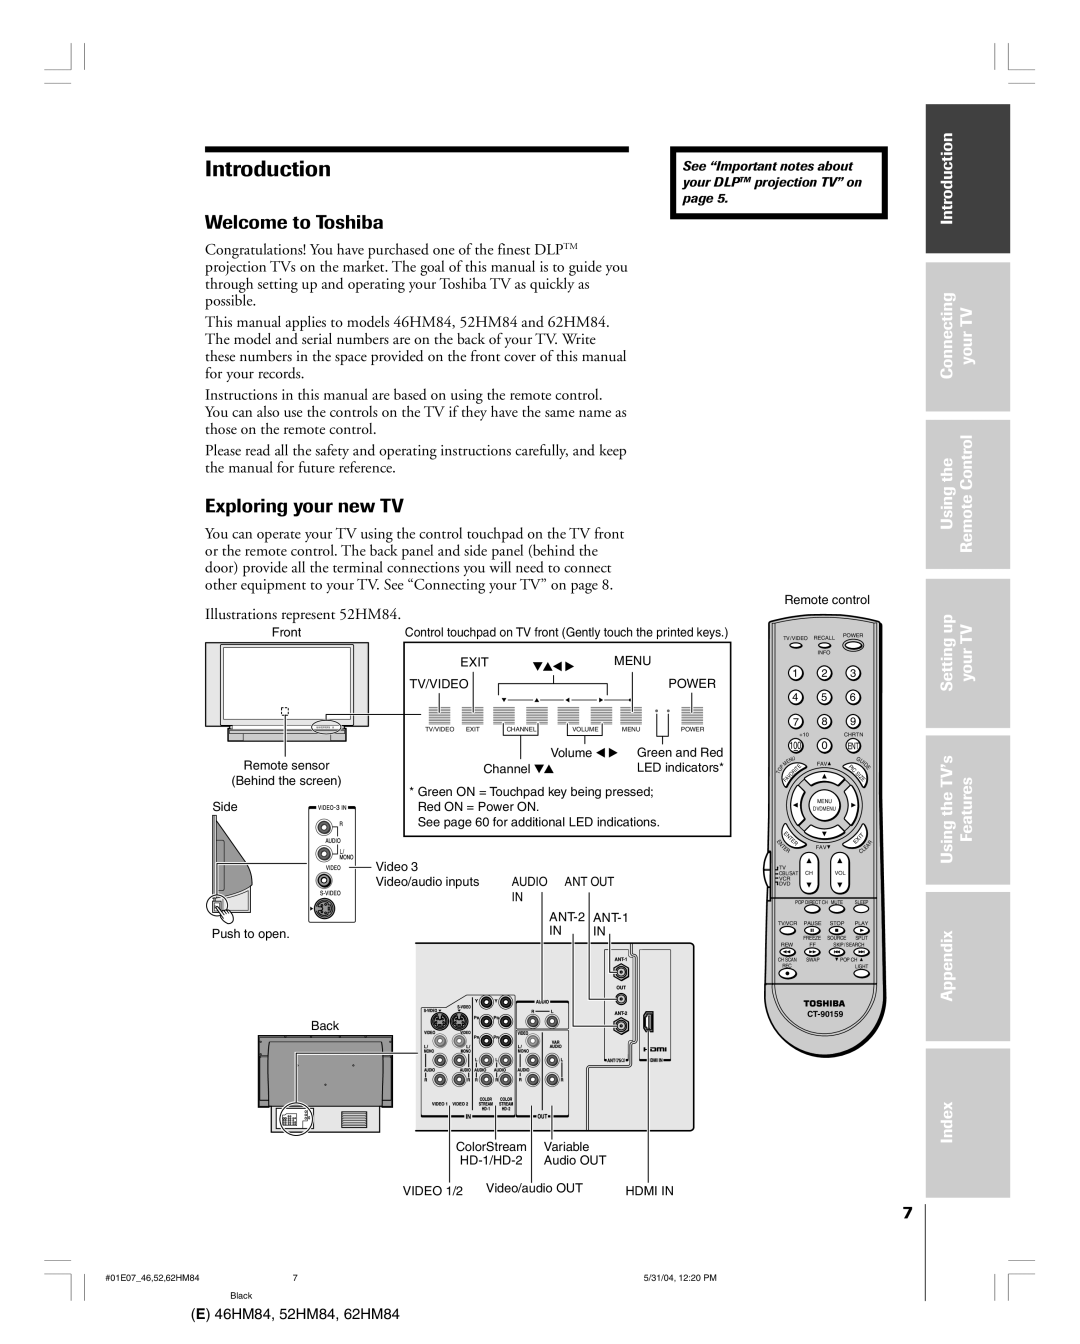 Toshiba 46HM84 owner manual Introduction, Welcome to Toshiba, Exploring your new TV, Illustrations represent 52HM84 